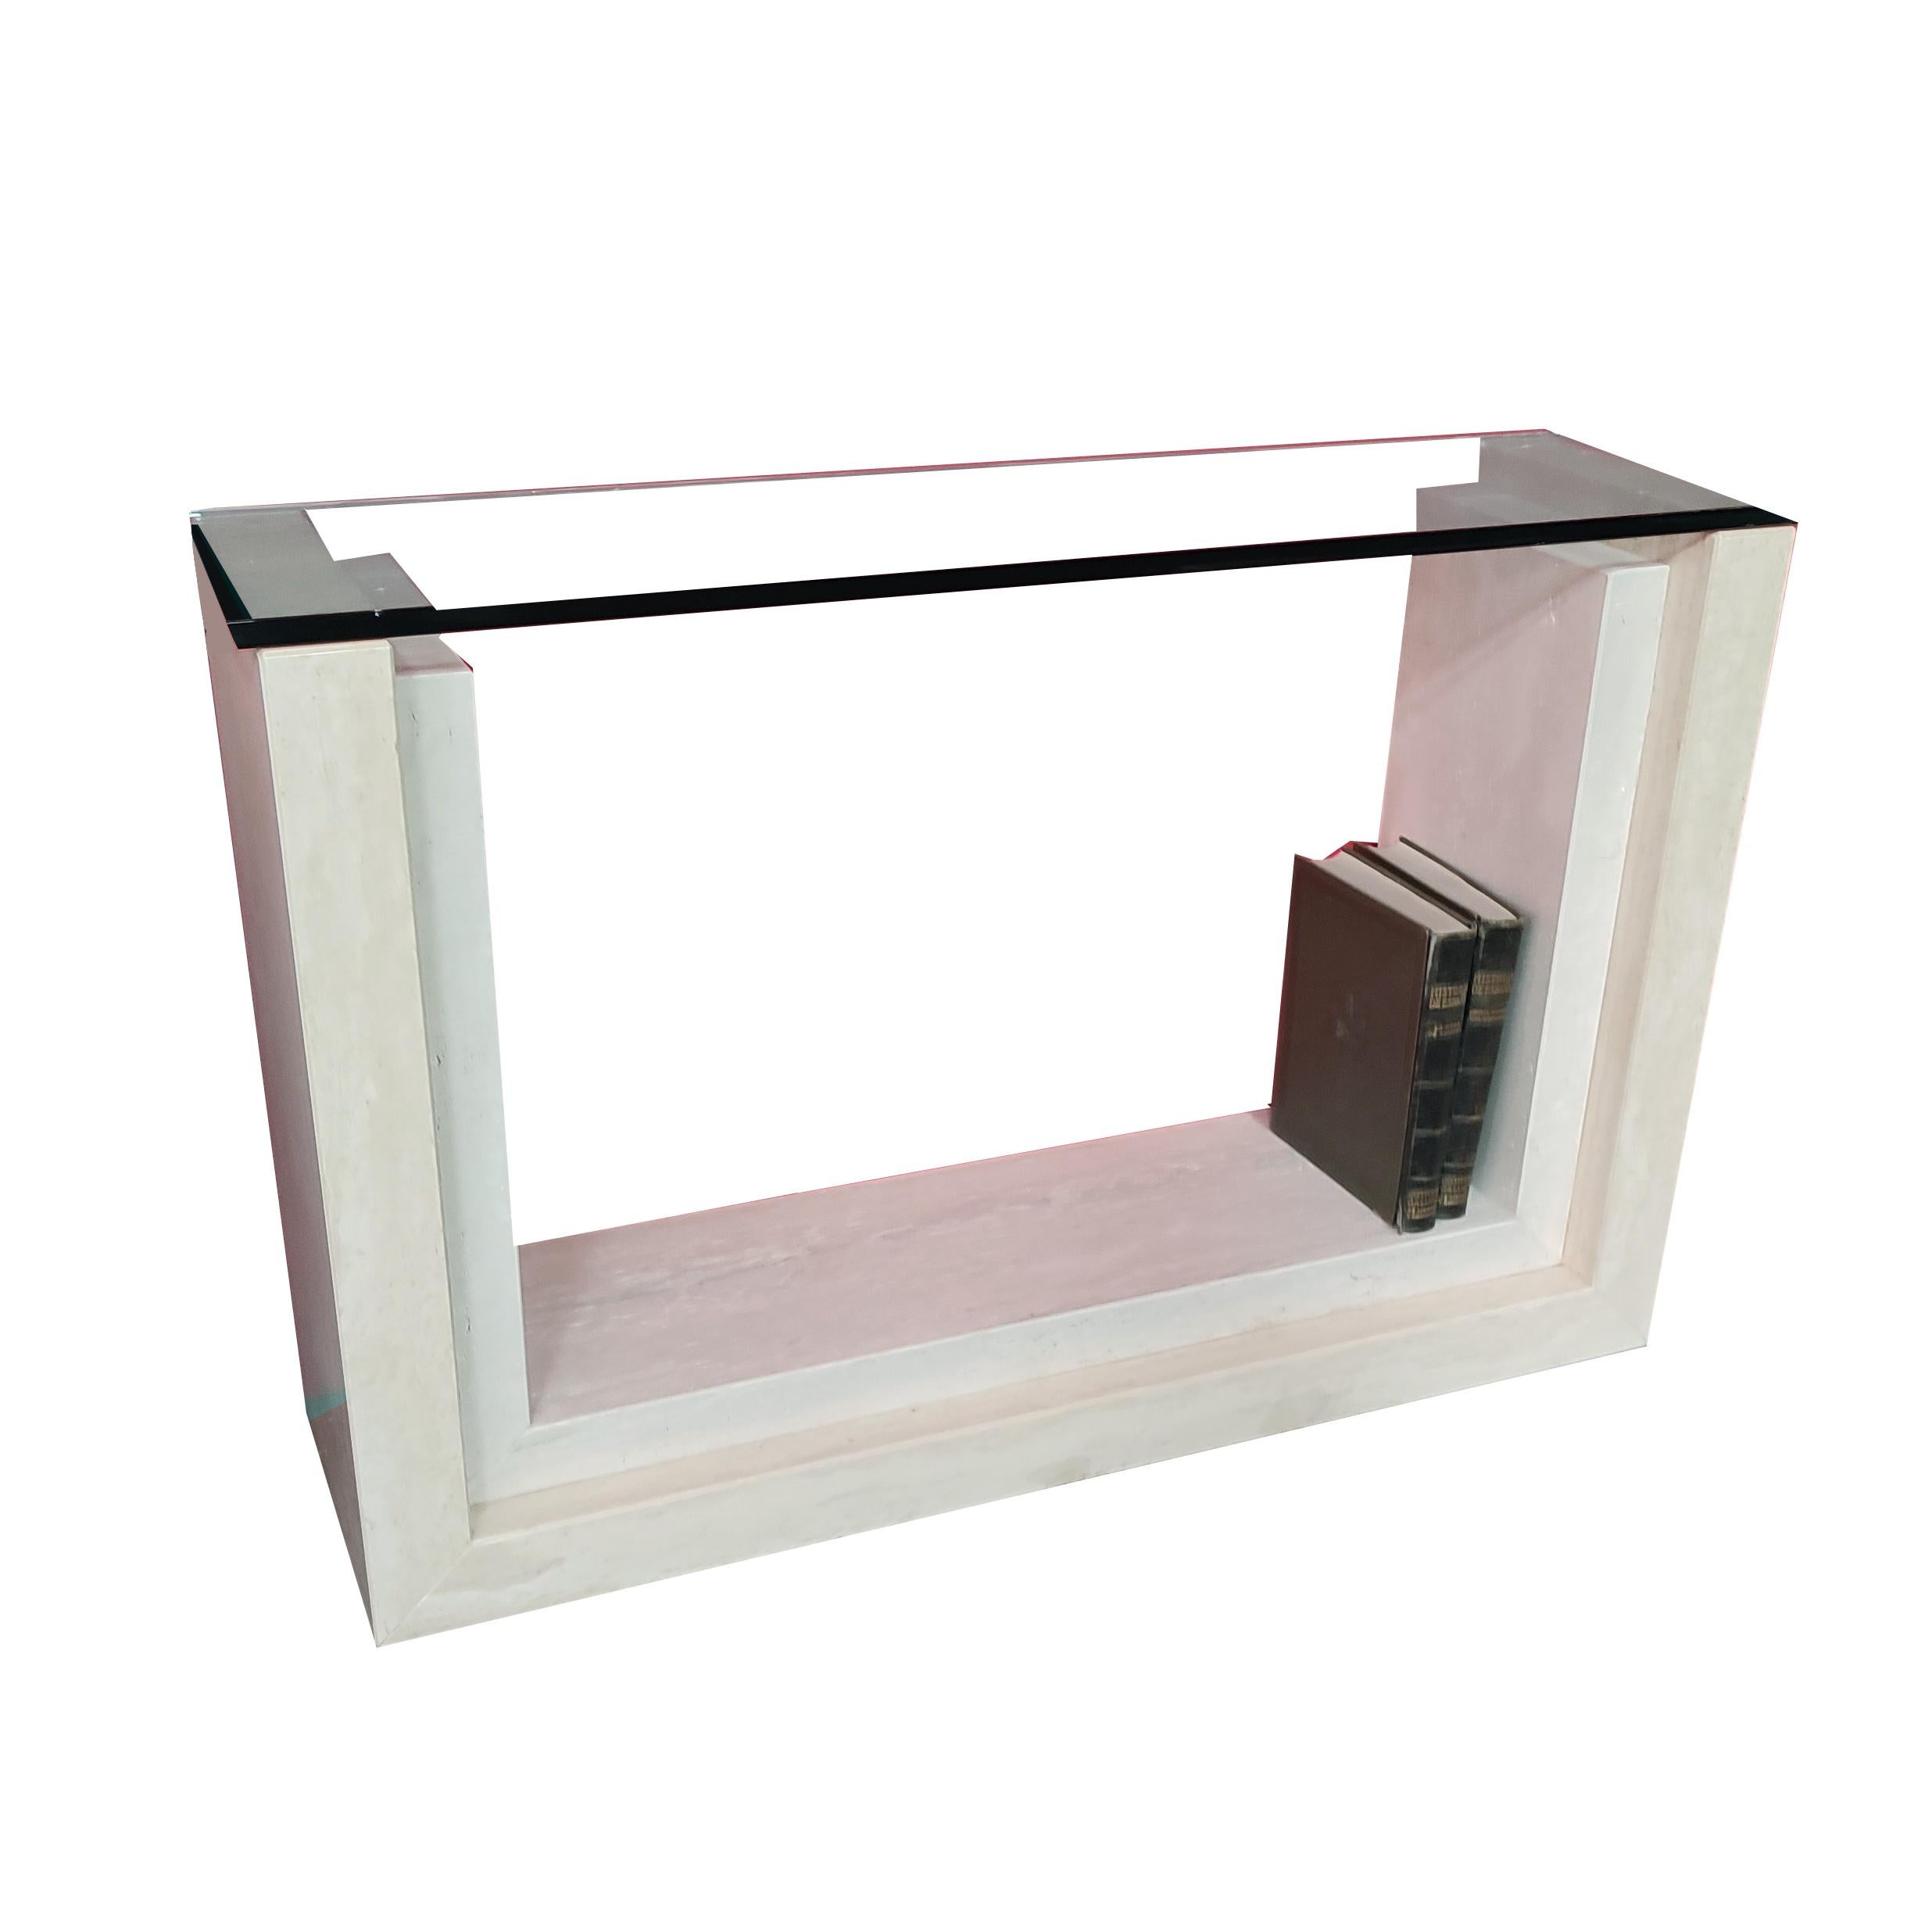 Hand-Crafted Feles Marble Travertine Console Table Natural & Matte Travertine in Stock Meddel